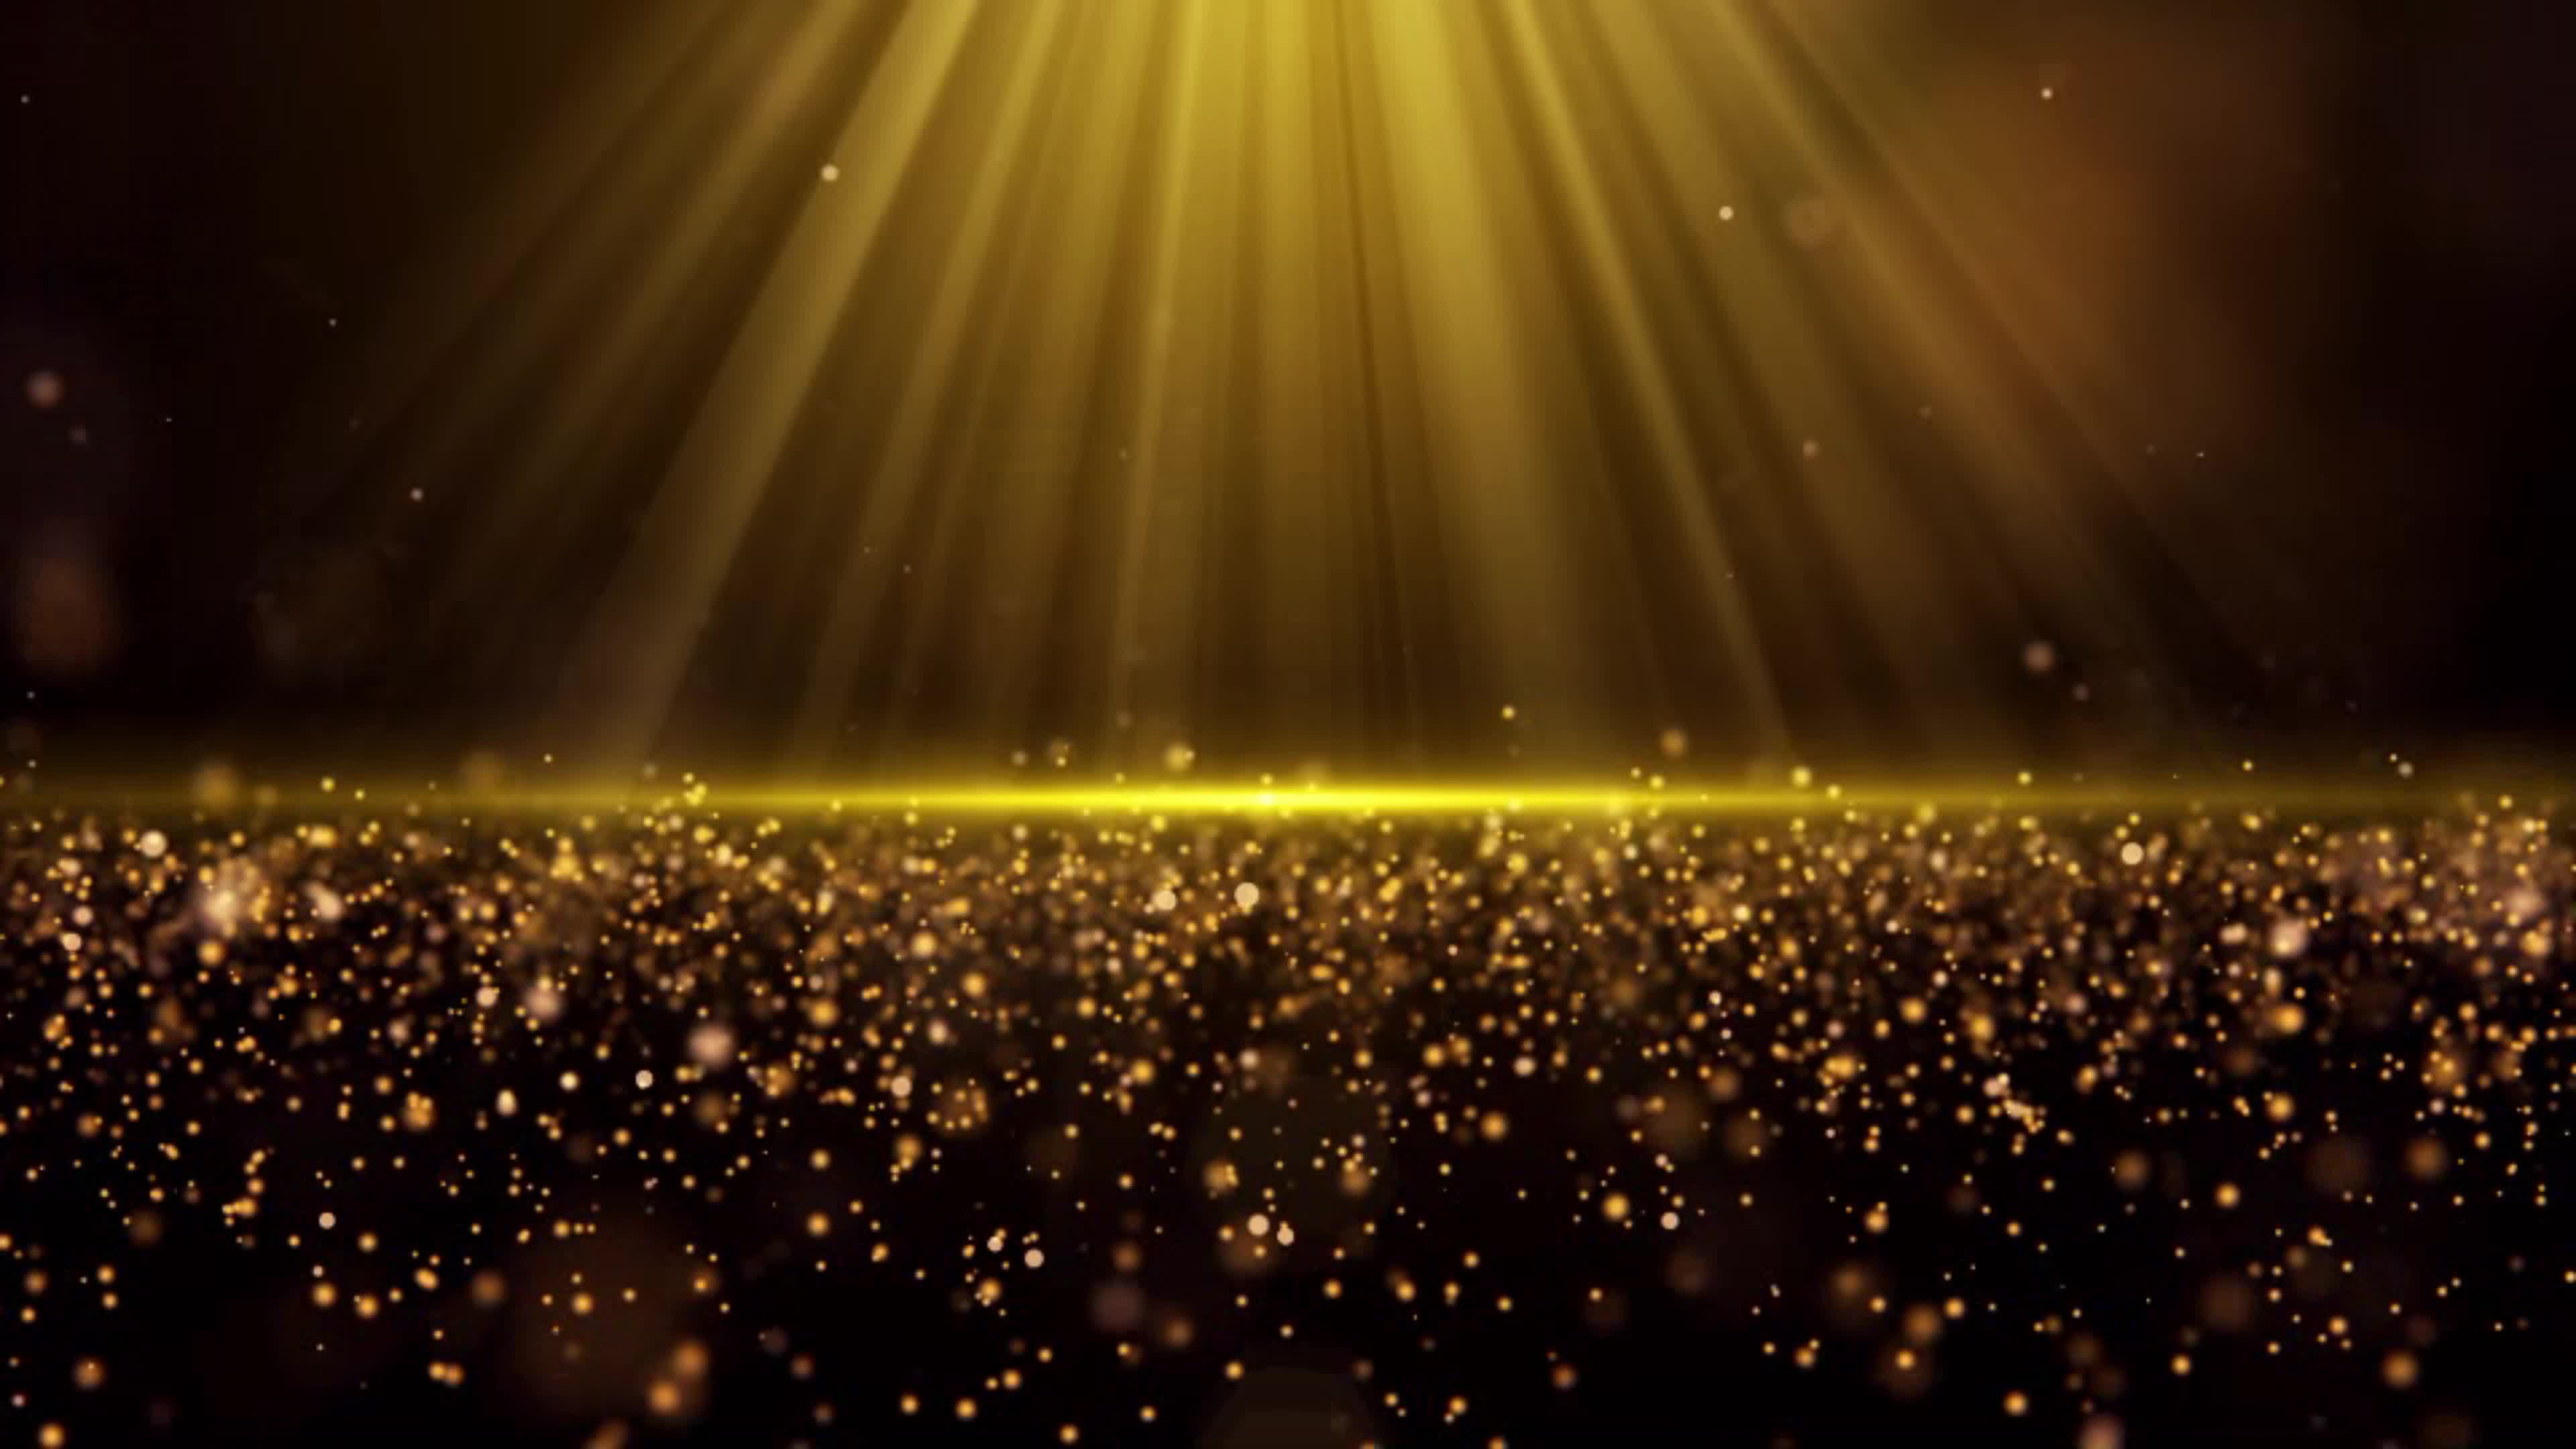 Light shining on gold dust particles